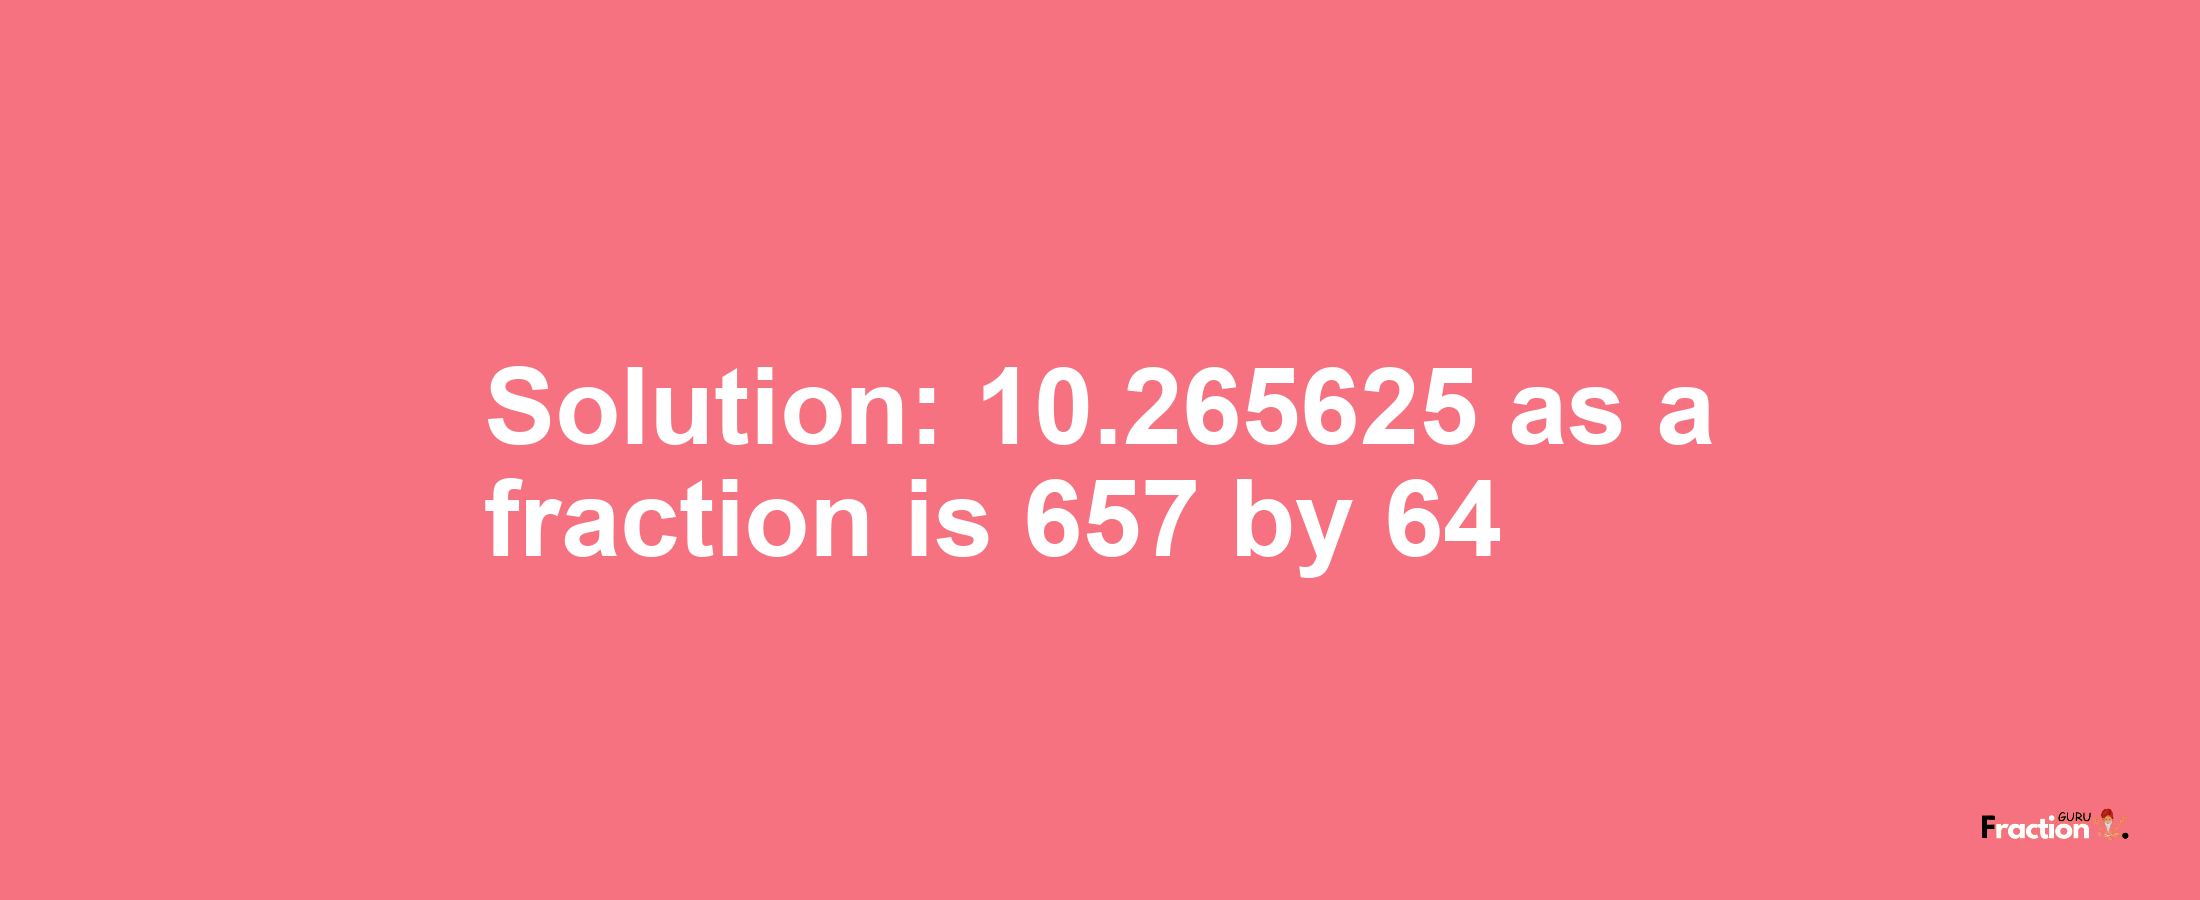 Solution:10.265625 as a fraction is 657/64